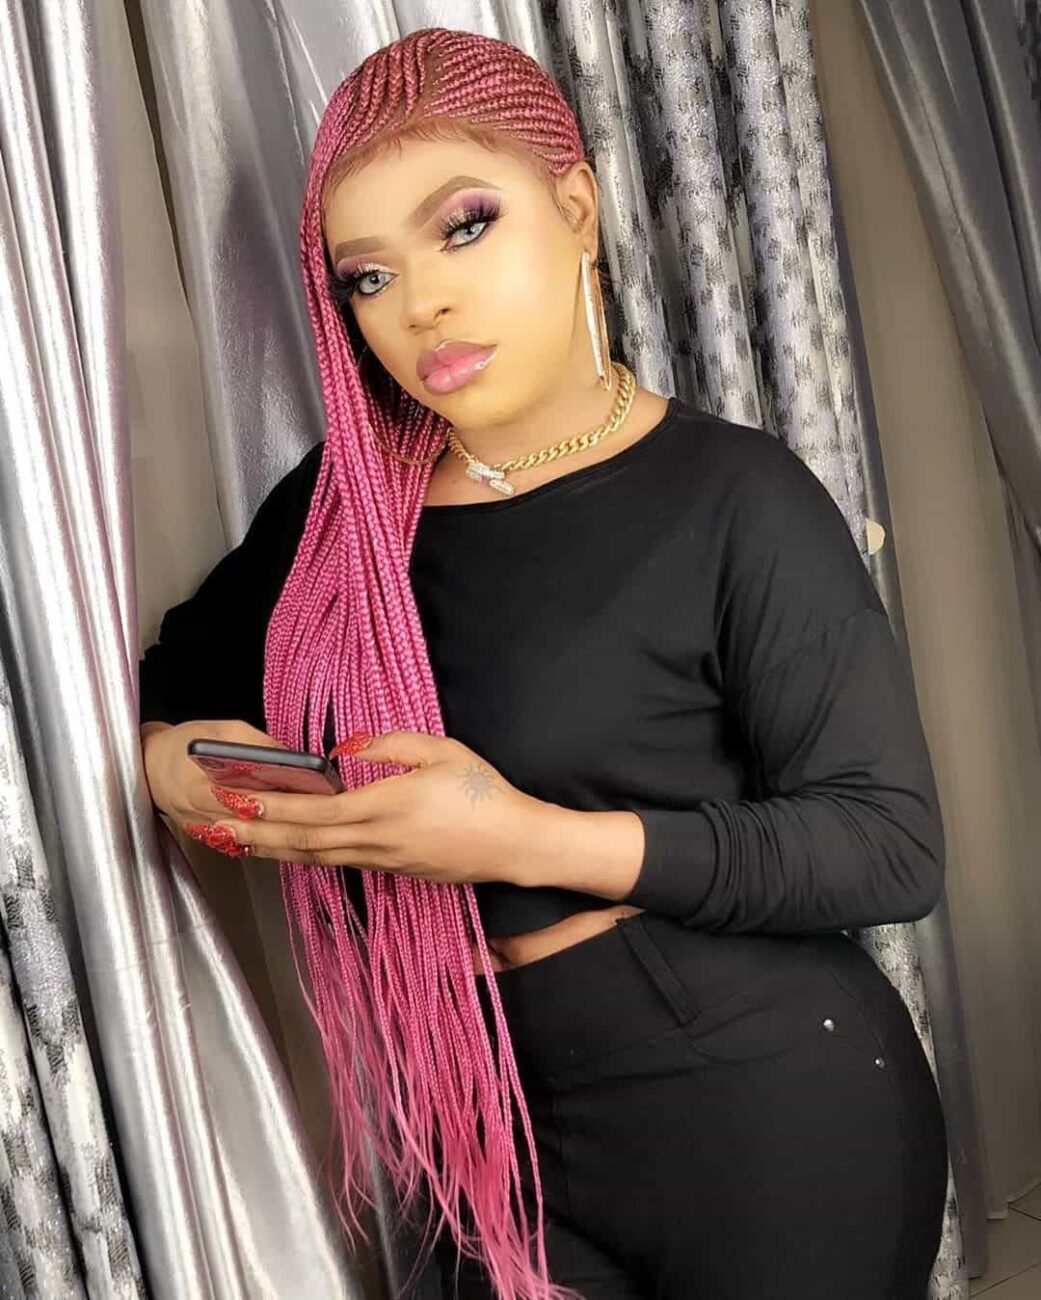 Bobrisky declares who he wants to marry